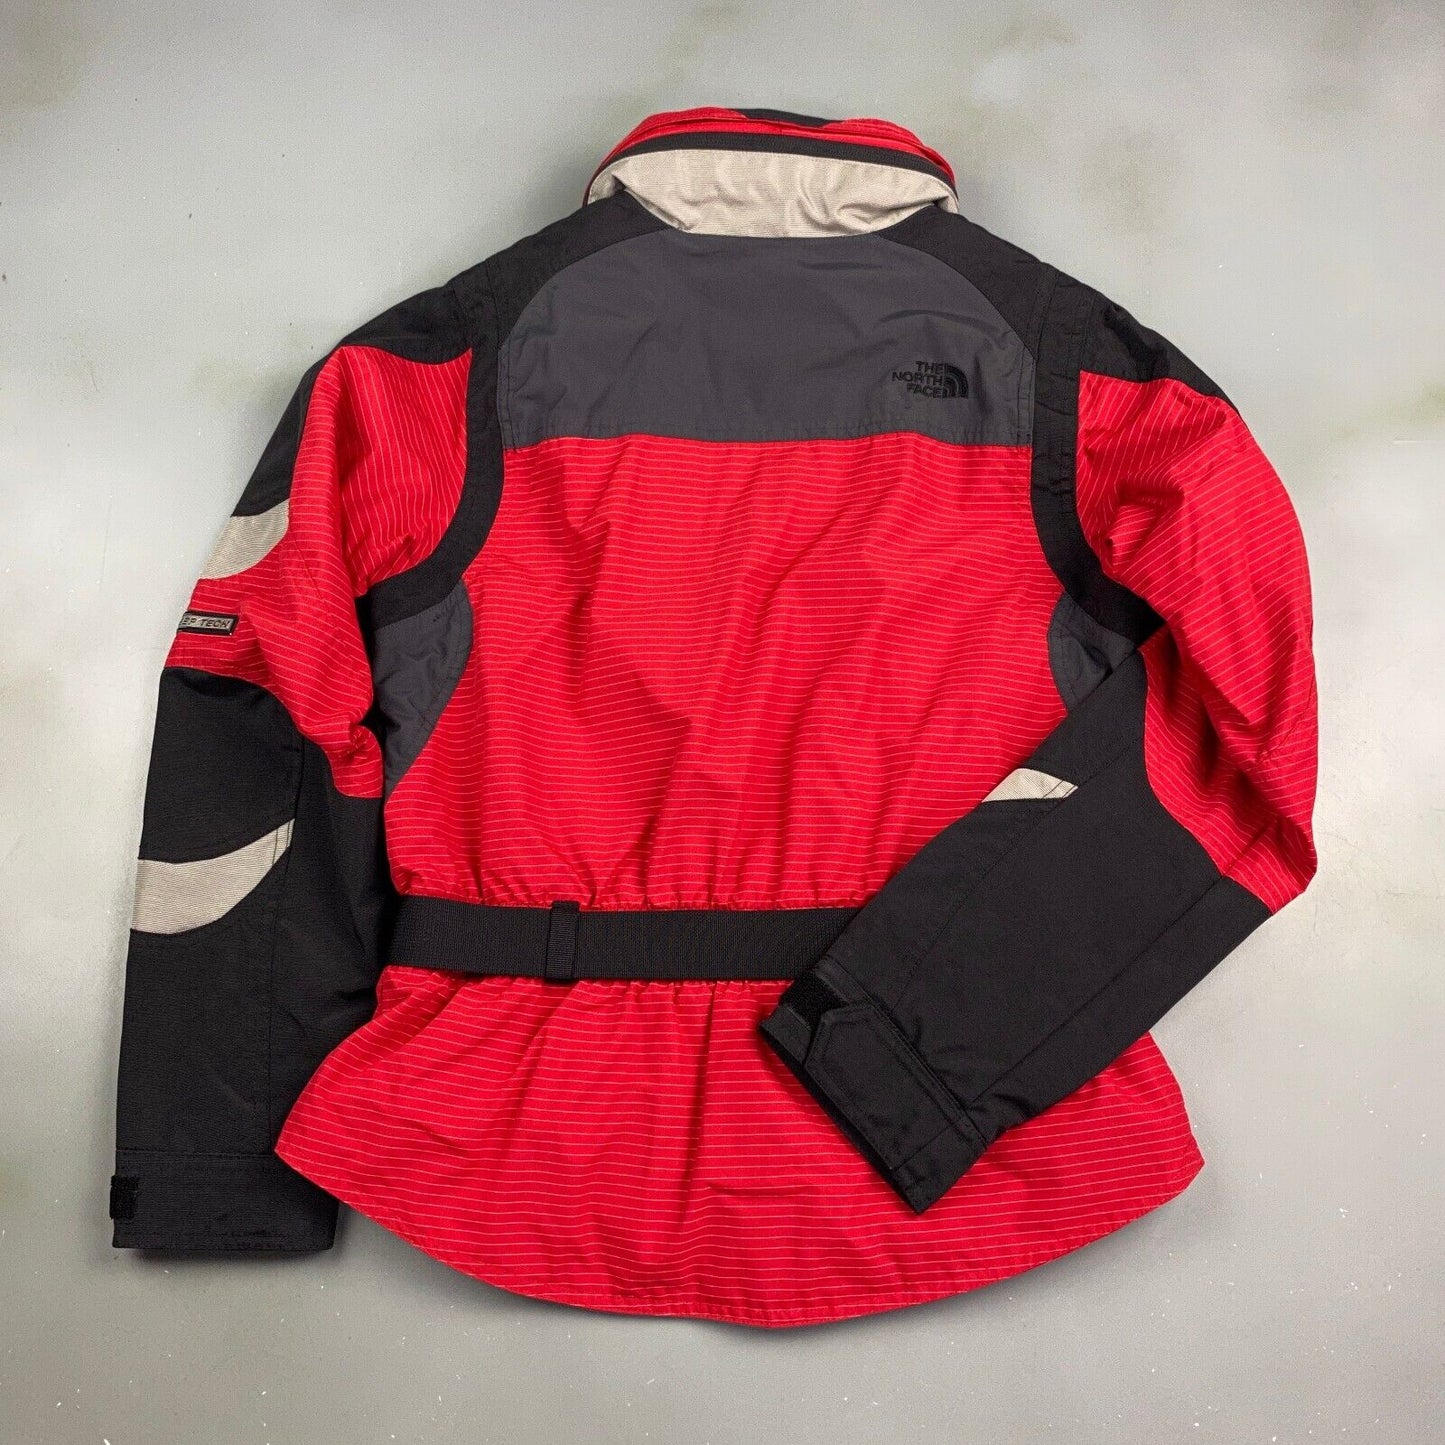 VINTAGE The North Face Steep Tech Jacket sz Small Womens Adult